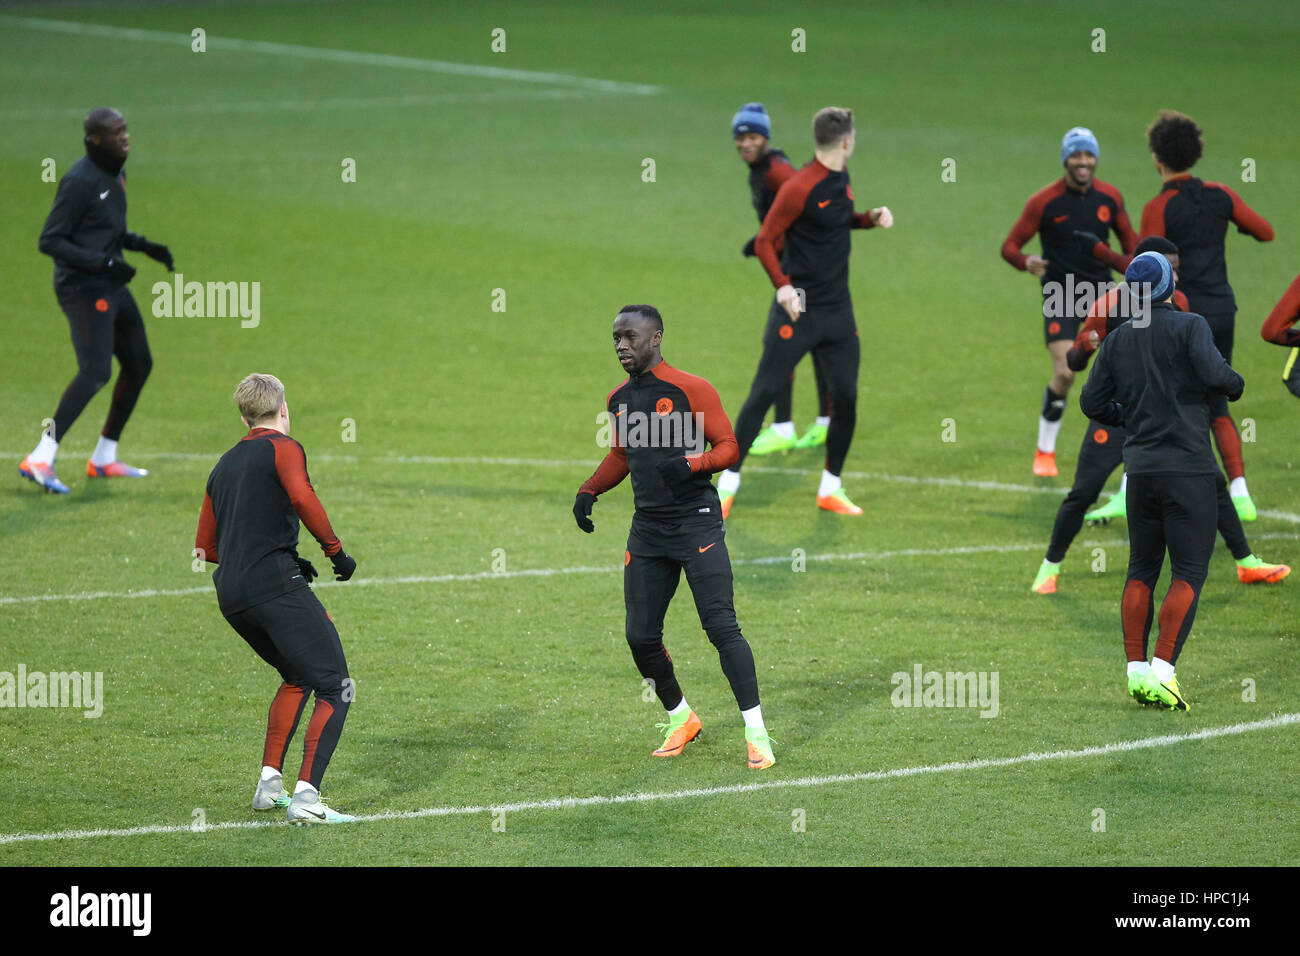 Manchester, UK. 20th Feb, 2017. Bacary Sagna of Manchester City during training before Manchester City's UEFA Champions League match against Monaco, at their Academy Stadium on February 20th 2017 in Manchester, England. Credit: Daniel Chesterton/Alamy Live News Stock Photo